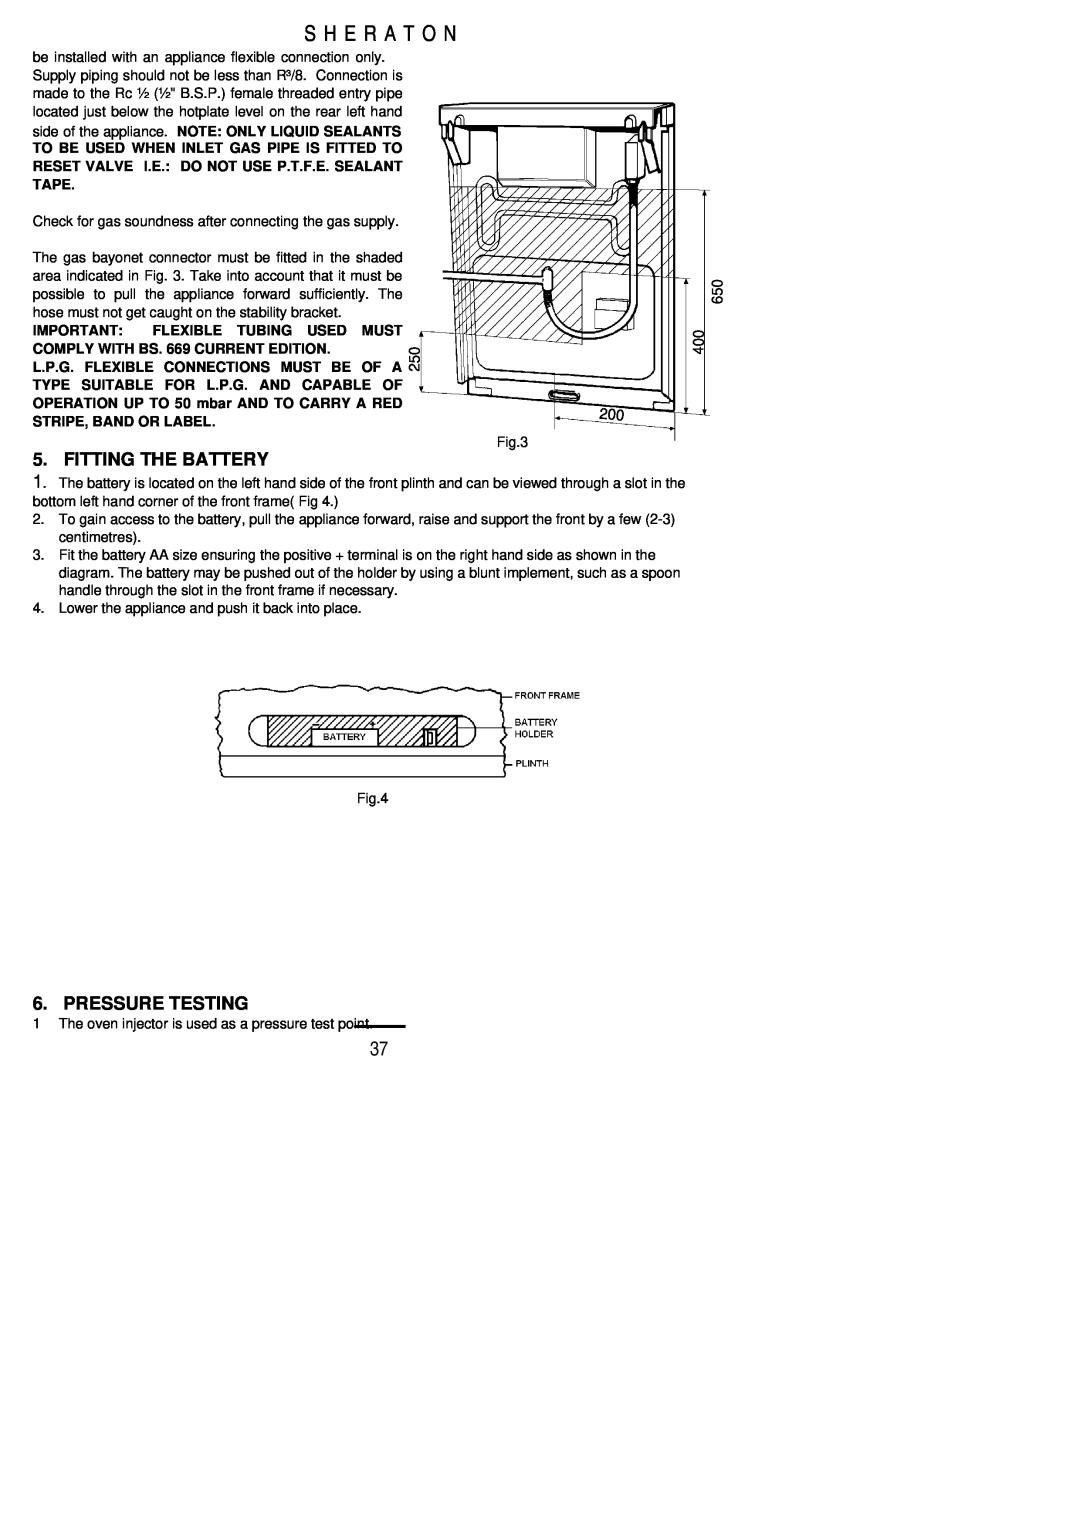 Parkinson Cowan U02059 installation instructions S H E R A T O N, Fitting The Battery, Pressure Testing 